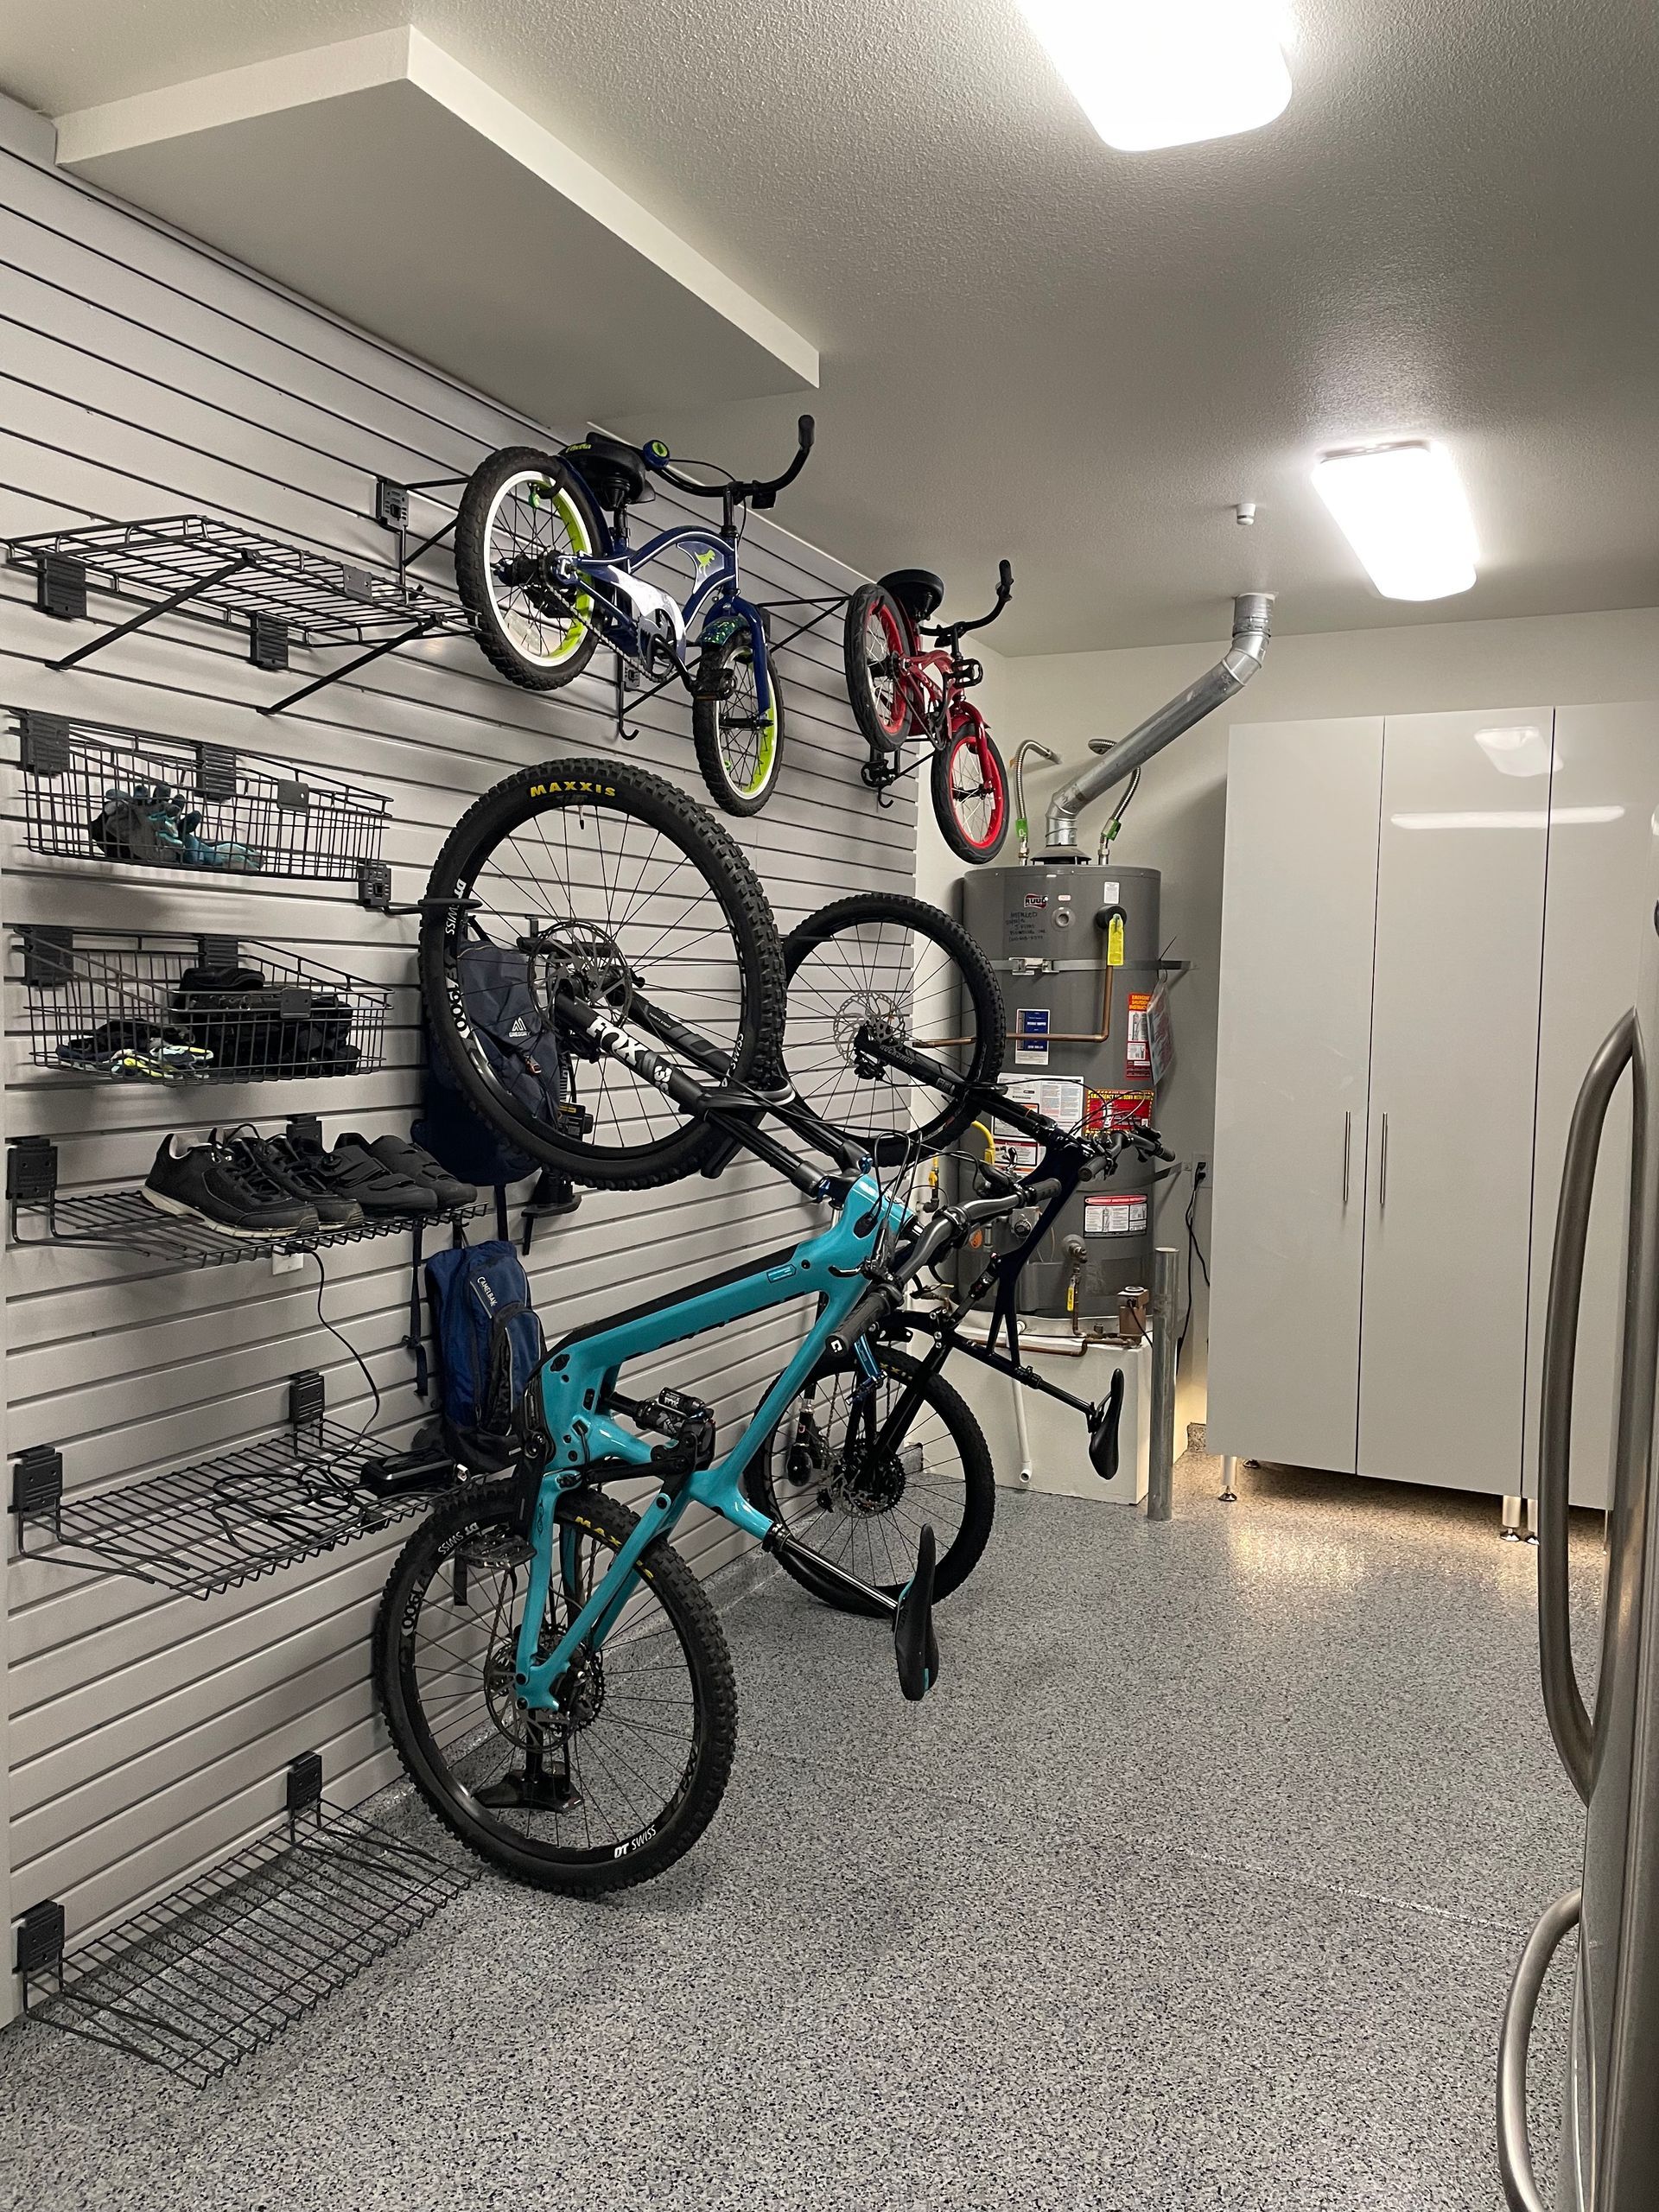 Ways to store your bike in the garage